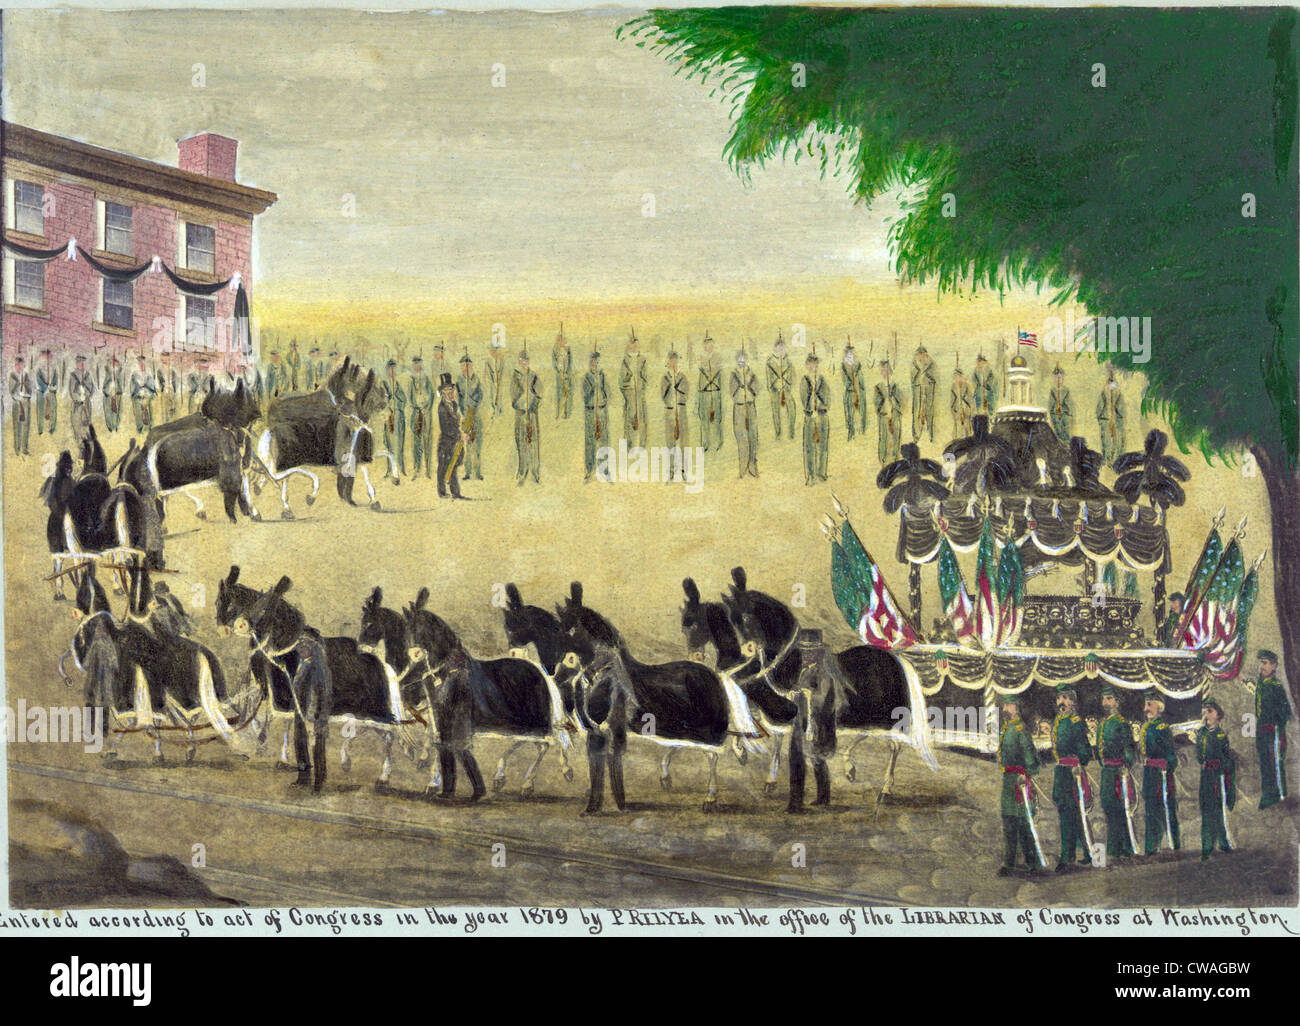 Abraham Lincoln's funeral car in New York City on April 26th, 1865 in folk art style painting.  Lincoln's funeral train left Stock Photo